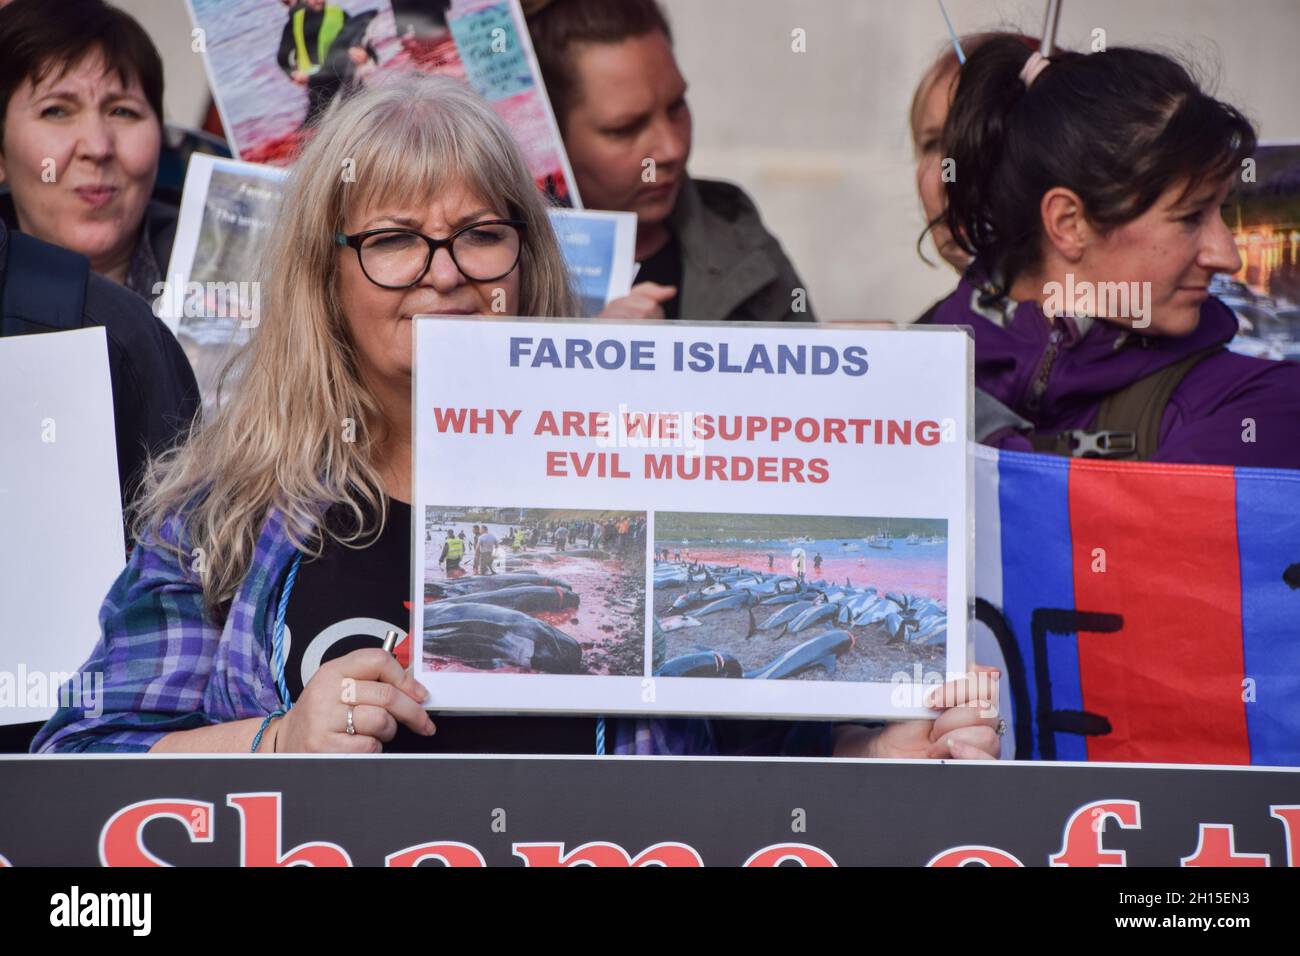 London, UK. 16th Oct, 2021. A protester holds a placard critical of the Faroe Islands during the demonstration in Trafalgar Square.Members of marine conservation organization Sea Shepherd and other activists marched through Westminster, calling for an end to the slaughter of dolphins in Faroe Islands and Taiji, Japan. (Photo by Vuk Valcic/SOPA Images/Sipa USA) Credit: Sipa USA/Alamy Live News Stock Photo